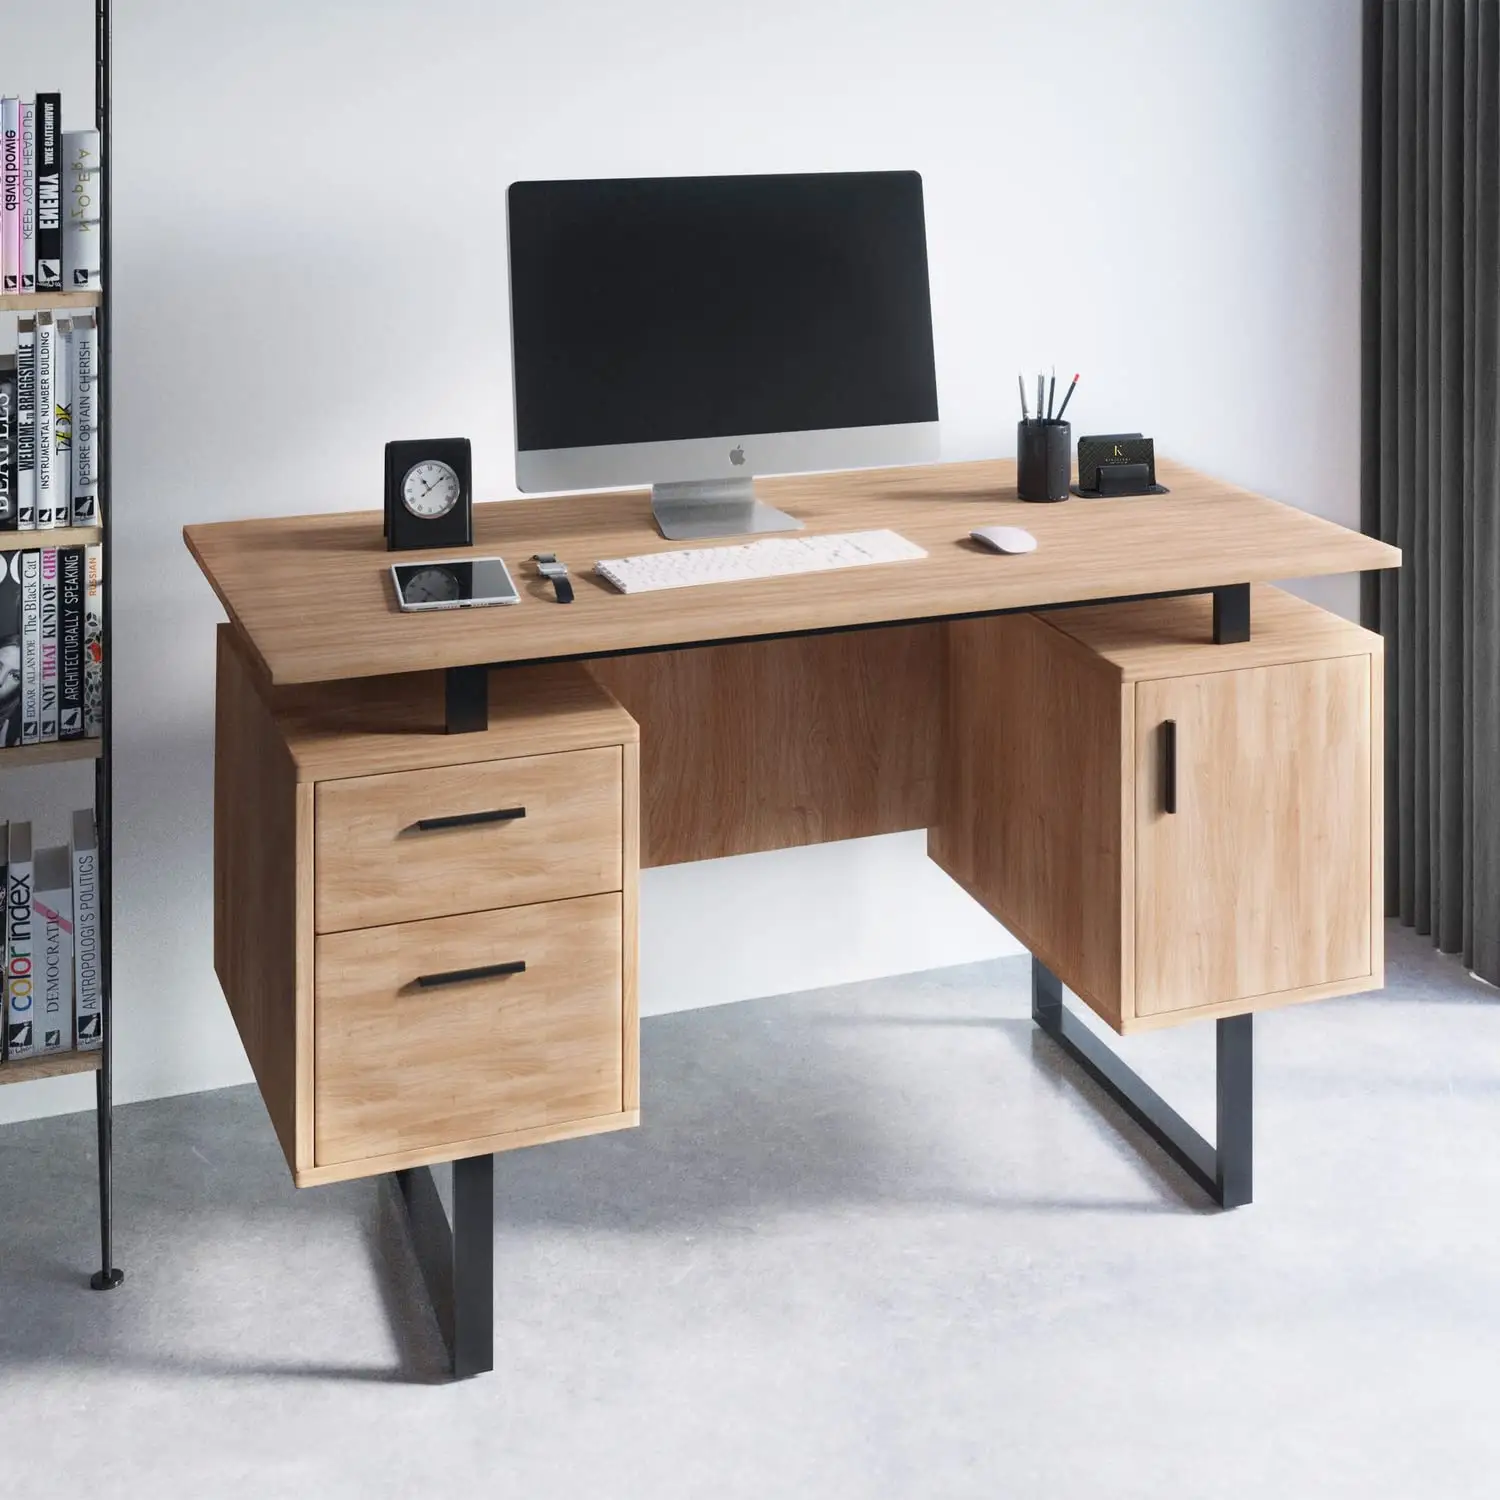 Made in China Office Furniture White Office Computer Desk with Four Drawers mesa